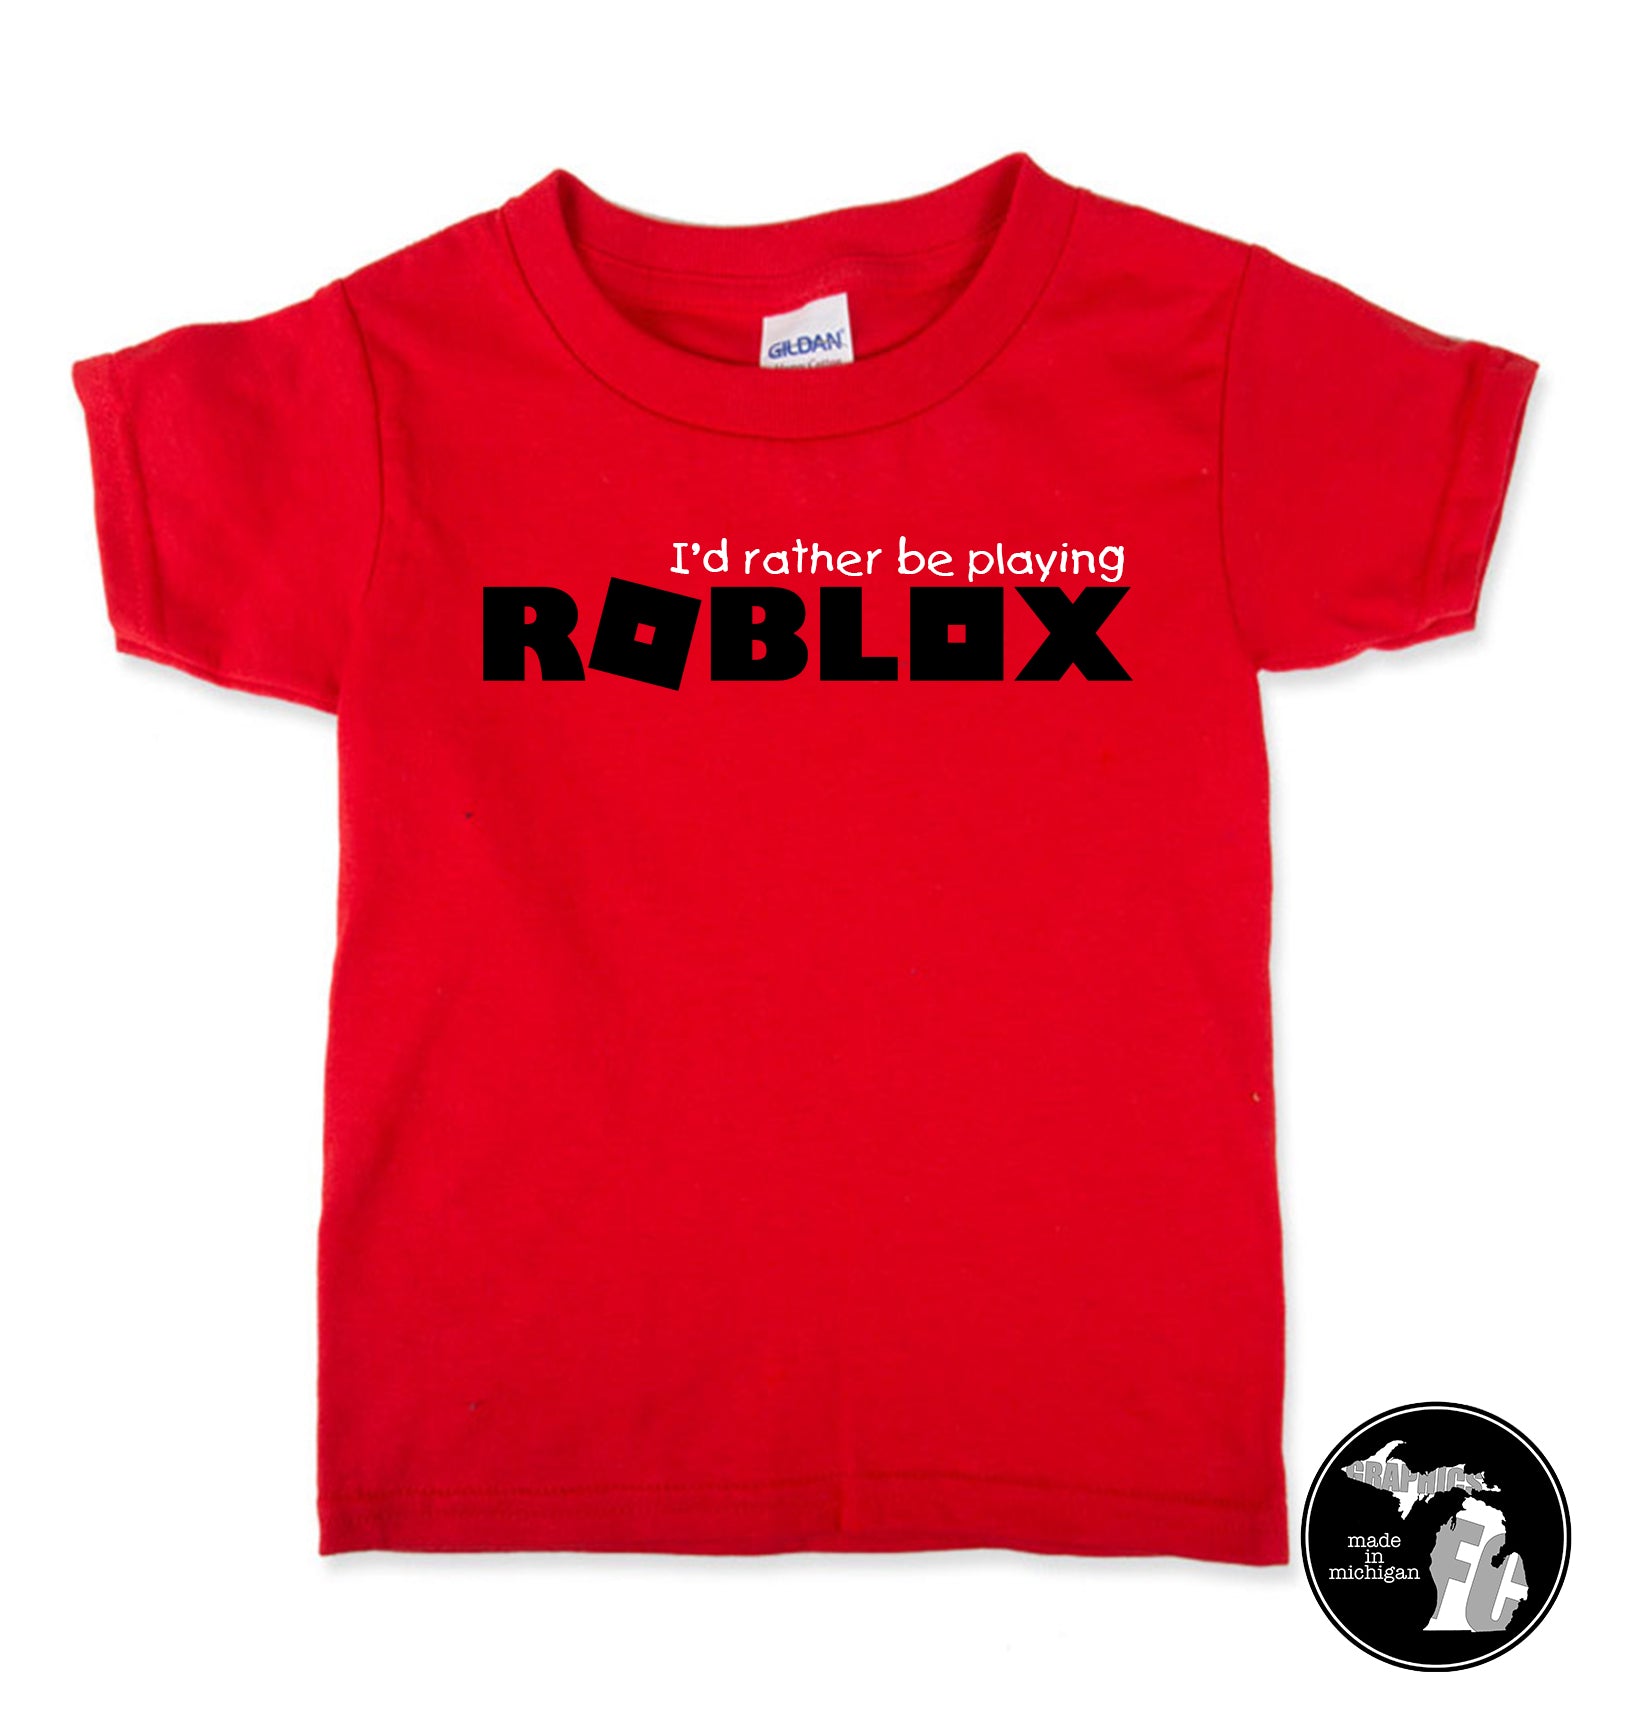 Roblox T Shirt With Personal User Name Kids Shirt Child Adults Furniture City Graphics - t shirt chucky roblox free roblox account username and